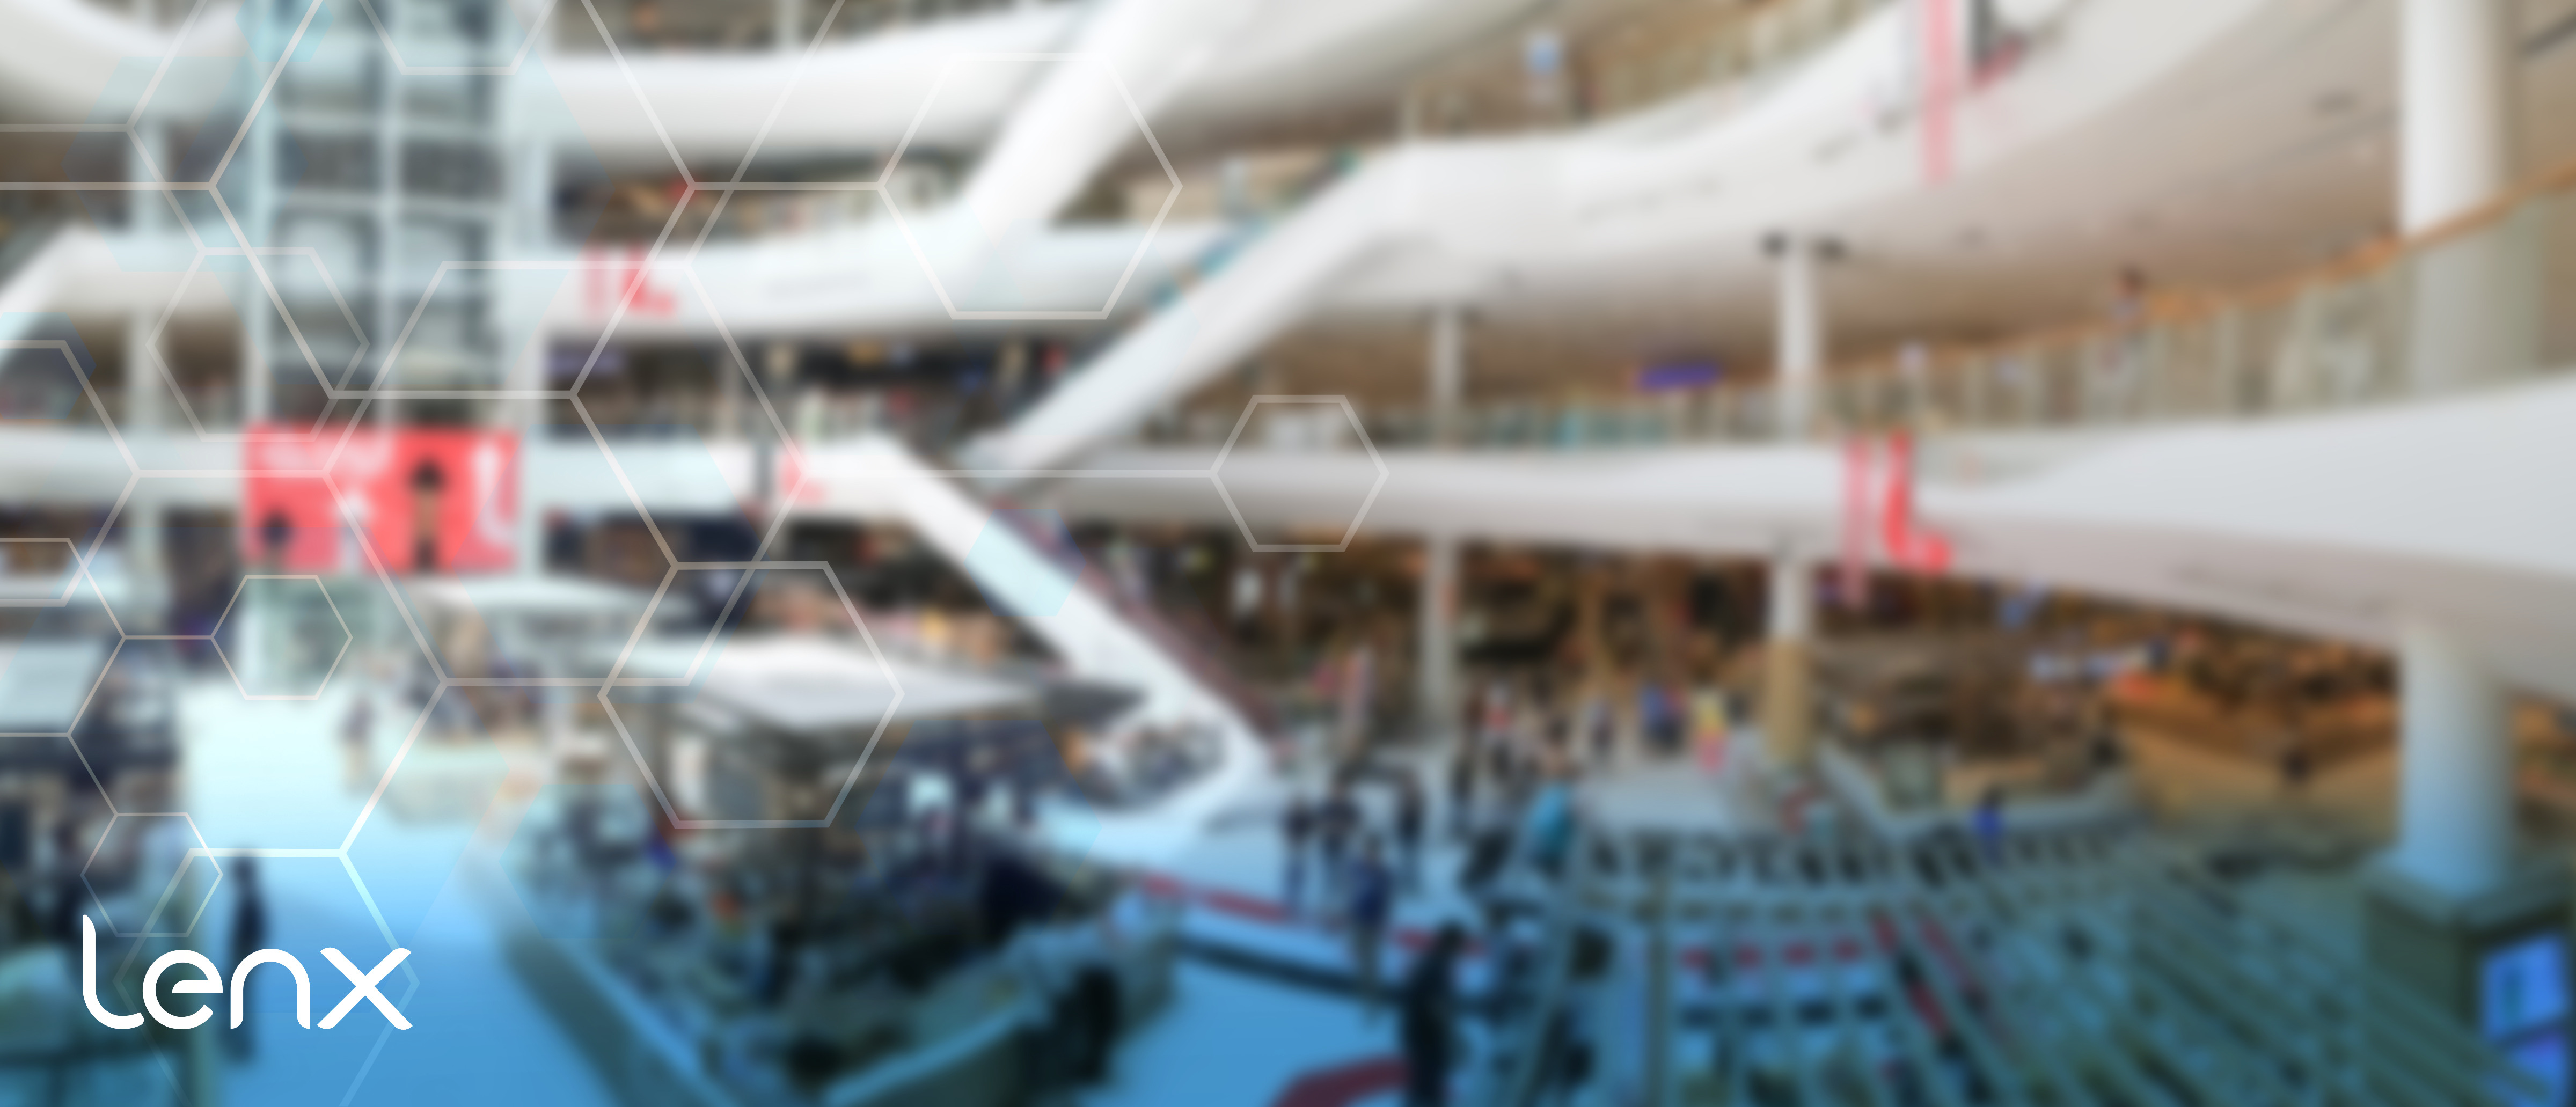 Enhancing Mall Safety with AI Security and Active Shooter Detection Systems